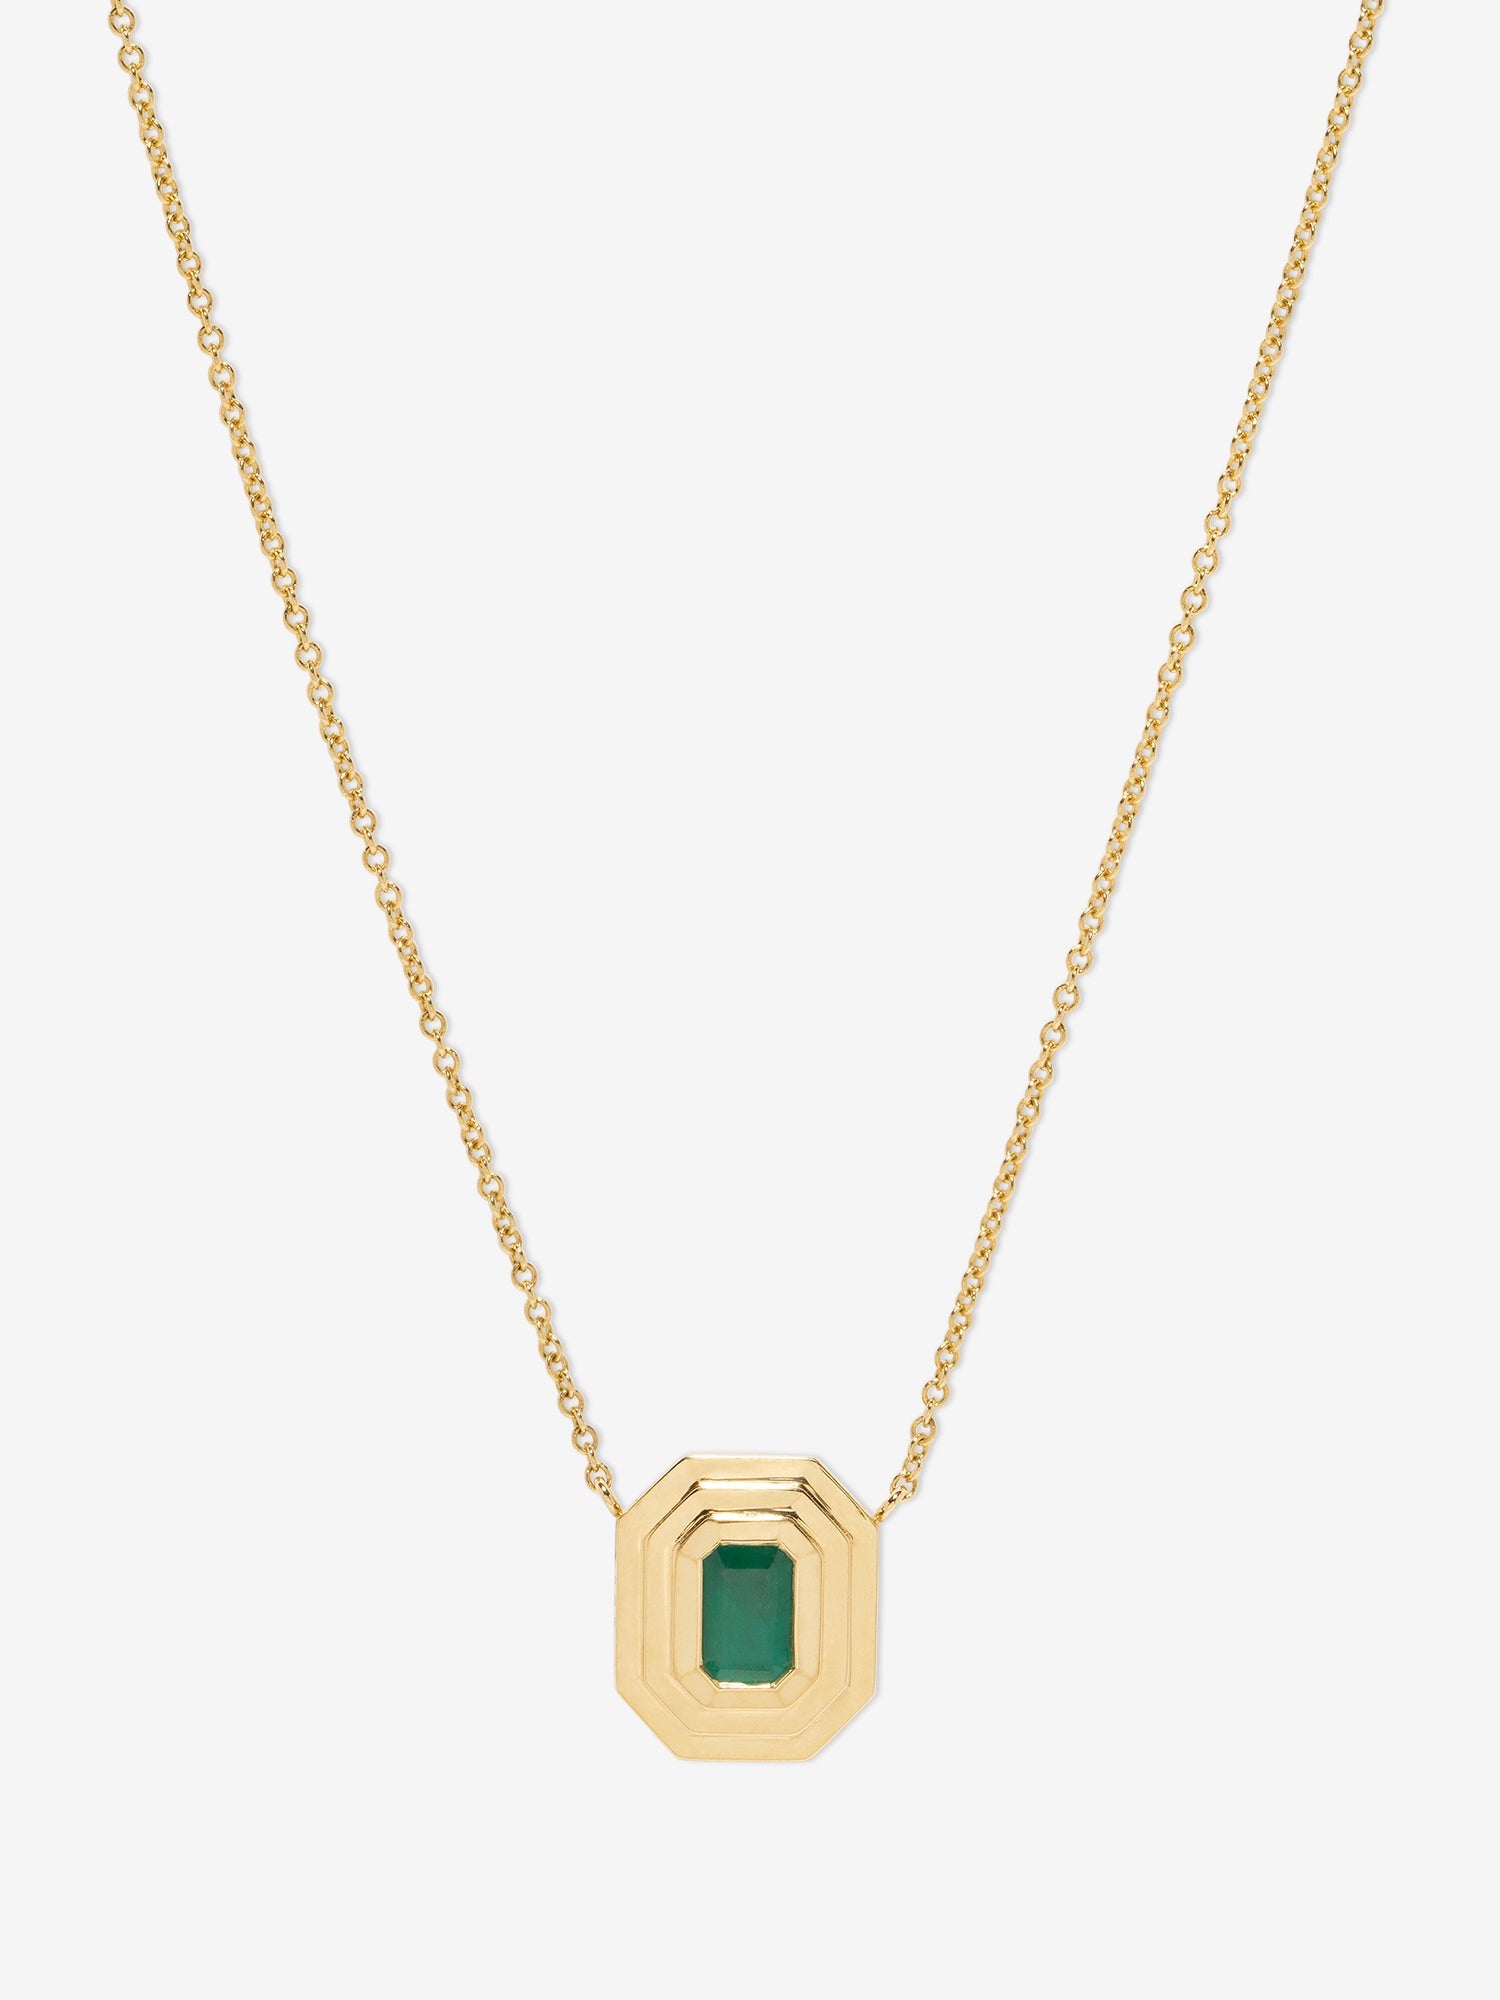 Emerald Staircase Necklace